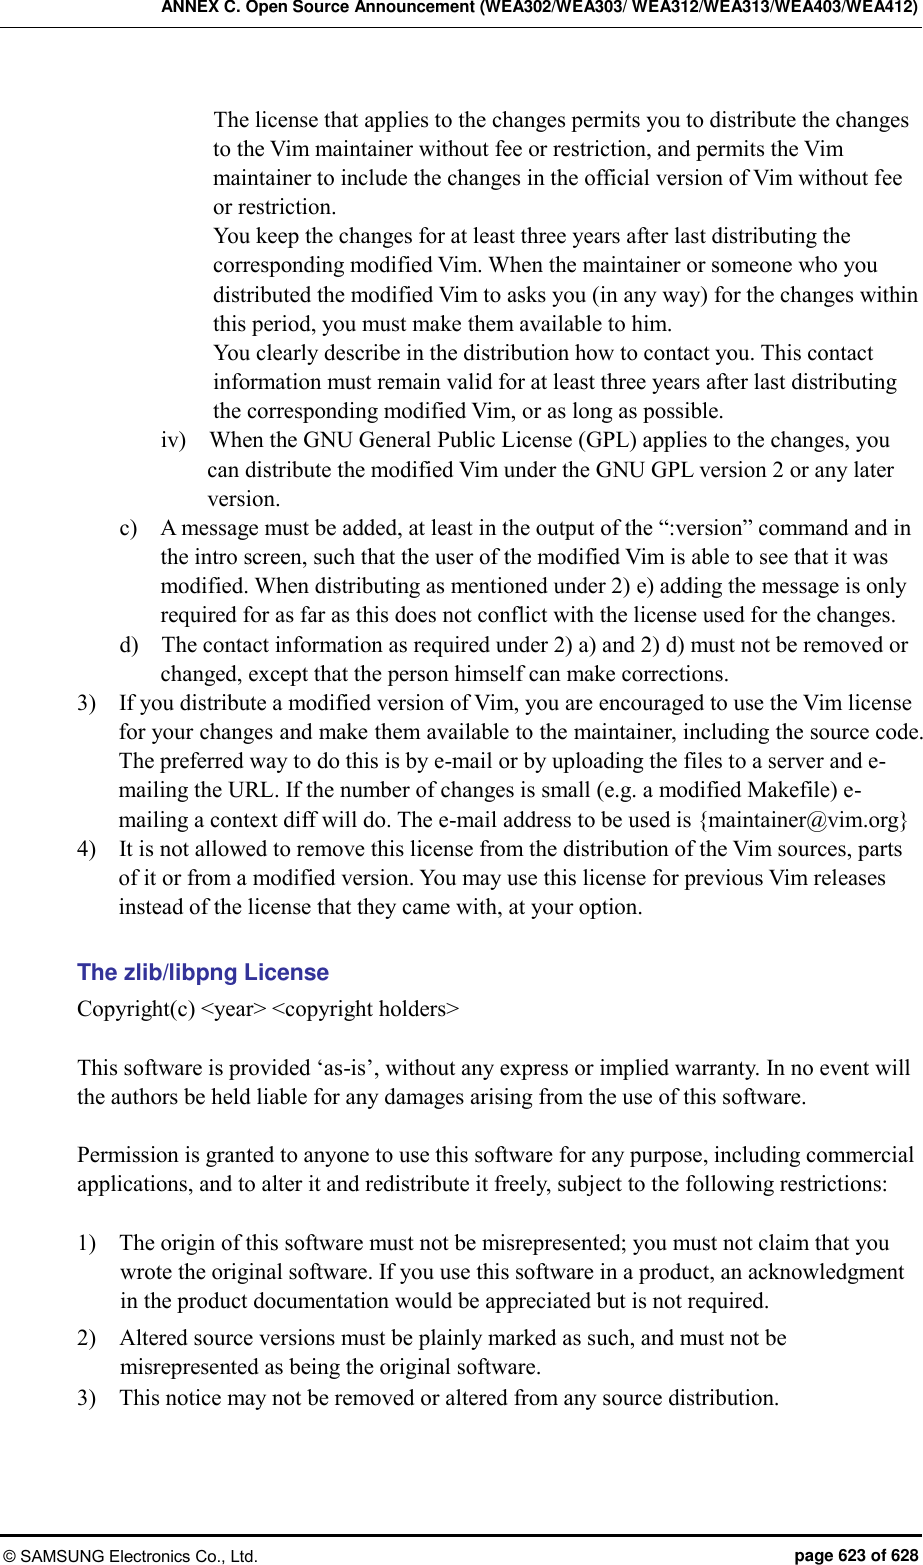 ANNEX C. Open Source Announcement (WEA302/WEA303/ WEA312/WEA313/WEA403/WEA412) © SAMSUNG Electronics Co., Ltd.  page 623 of 628 The license that applies to the changes permits you to distribute the changes to the Vim maintainer without fee or restriction, and permits the Vim maintainer to include the changes in the official version of Vim without fee or restriction. You keep the changes for at least three years after last distributing the corresponding modified Vim. When the maintainer or someone who you distributed the modified Vim to asks you (in any way) for the changes within this period, you must make them available to him. You clearly describe in the distribution how to contact you. This contact information must remain valid for at least three years after last distributing the corresponding modified Vim, or as long as possible. iv)    When the GNU General Public License (GPL) applies to the changes, you can distribute the modified Vim under the GNU GPL version 2 or any later version. c)    A message must be added, at least in the output of the “:version” command and in the intro screen, such that the user of the modified Vim is able to see that it was modified. When distributing as mentioned under 2) e) adding the message is only required for as far as this does not conflict with the license used for the changes. d)    The contact information as required under 2) a) and 2) d) must not be removed or changed, except that the person himself can make corrections. 3)    If you distribute a modified version of Vim, you are encouraged to use the Vim license for your changes and make them available to the maintainer, including the source code. The preferred way to do this is by e-mail or by uploading the files to a server and e-mailing the URL. If the number of changes is small (e.g. a modified Makefile) e-mailing a context diff will do. The e-mail address to be used is {maintainer@vim.org} 4)    It is not allowed to remove this license from the distribution of the Vim sources, parts of it or from a modified version. You may use this license for previous Vim releases instead of the license that they came with, at your option.  The zlib/libpng License Copyright(c) &lt;year&gt; &lt;copyright holders&gt;  This software is provided ‘as-is’, without any express or implied warranty. In no event will the authors be held liable for any damages arising from the use of this software.  Permission is granted to anyone to use this software for any purpose, including commercial applications, and to alter it and redistribute it freely, subject to the following restrictions:  1)    The origin of this software must not be misrepresented; you must not claim that you wrote the original software. If you use this software in a product, an acknowledgment in the product documentation would be appreciated but is not required. 2)    Altered source versions must be plainly marked as such, and must not be misrepresented as being the original software. 3)    This notice may not be removed or altered from any source distribution.  